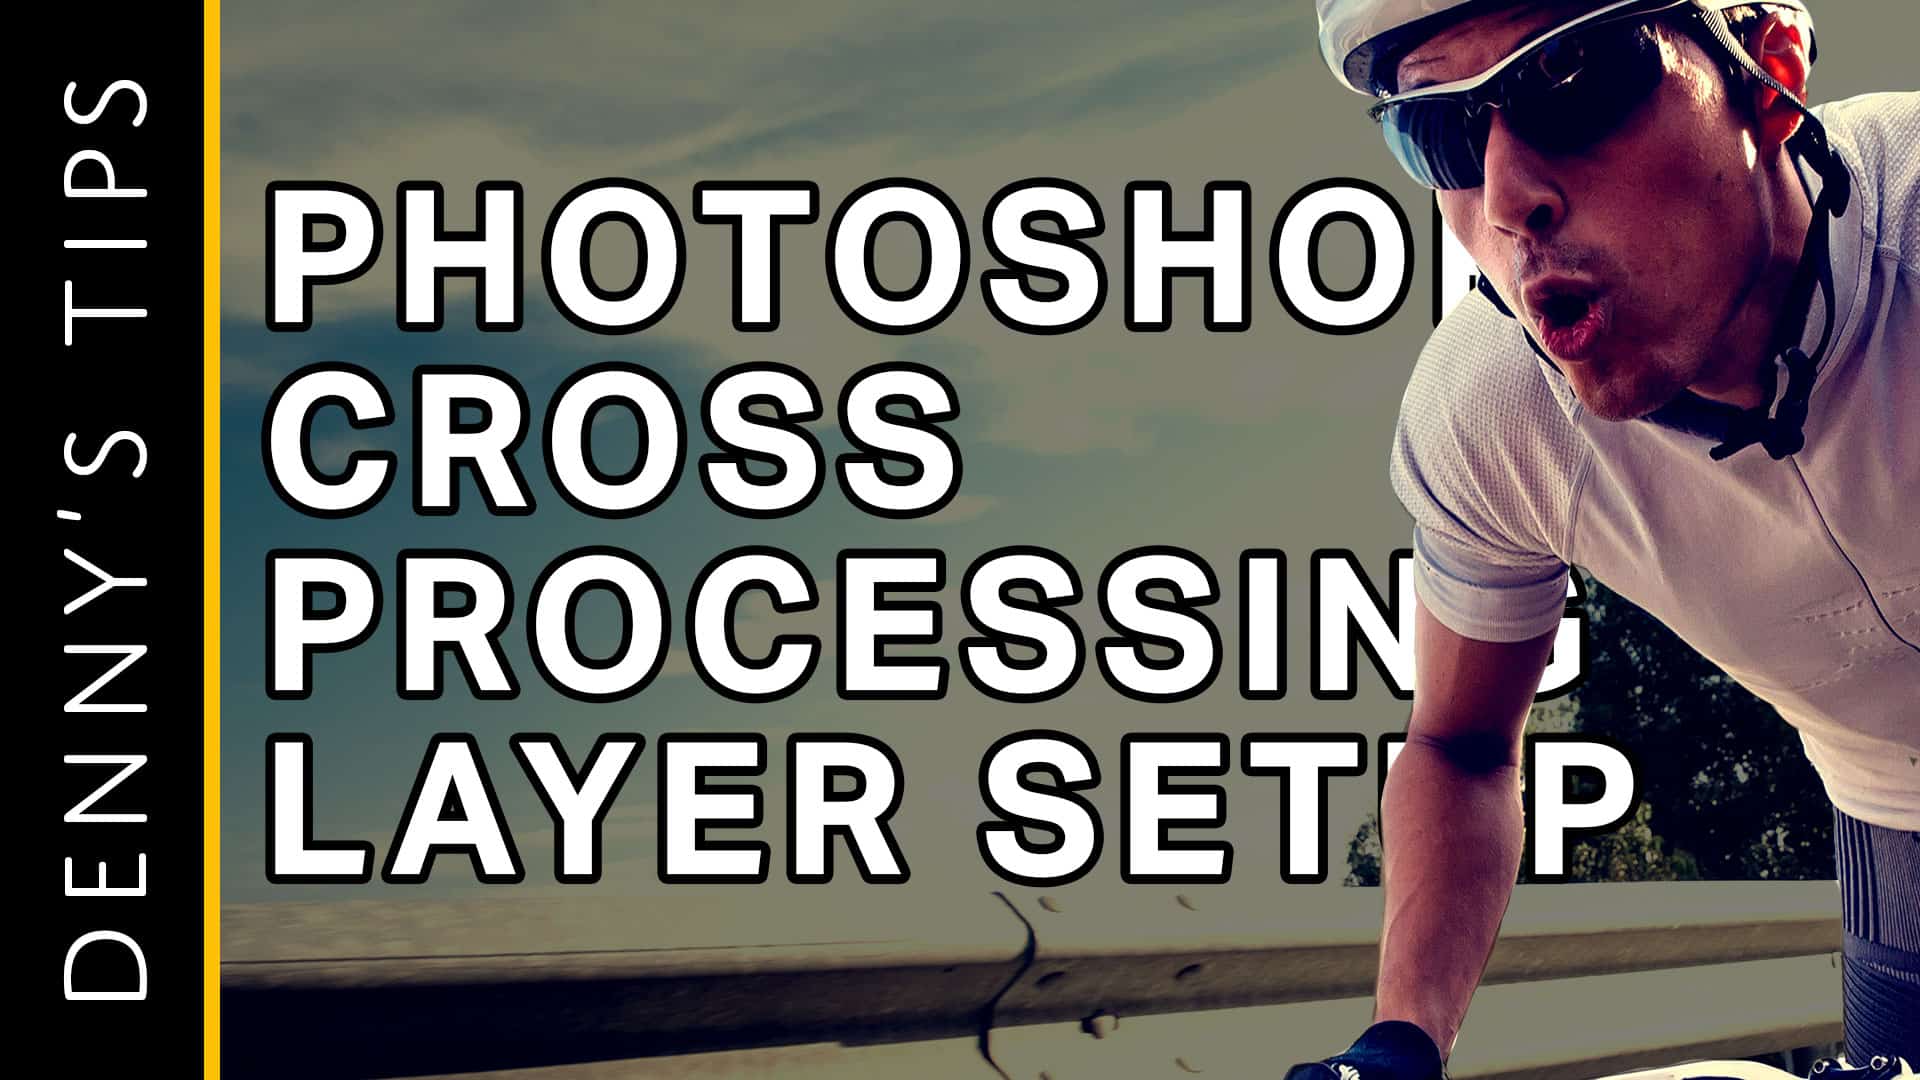 How to Easily Cross Process Your Photos in Photoshop